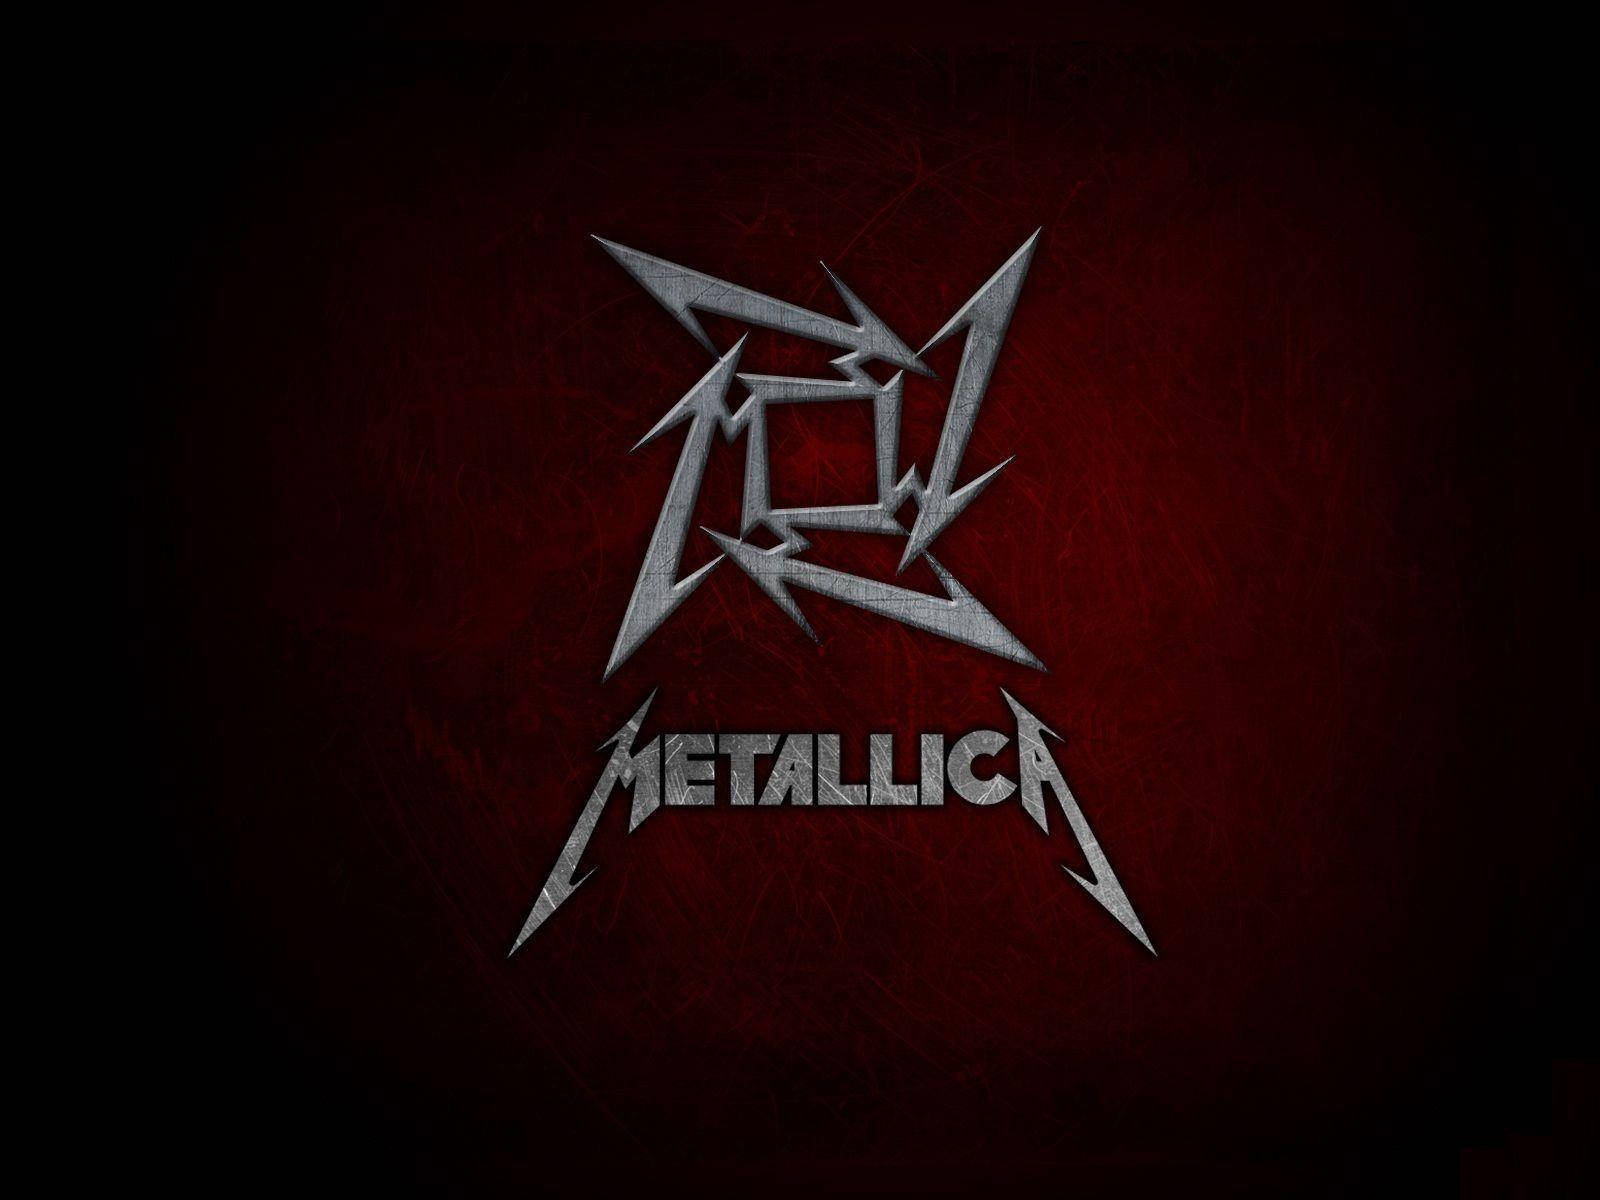 “Rock out with Metallica’s iconic ninja star emblem” Wallpaper